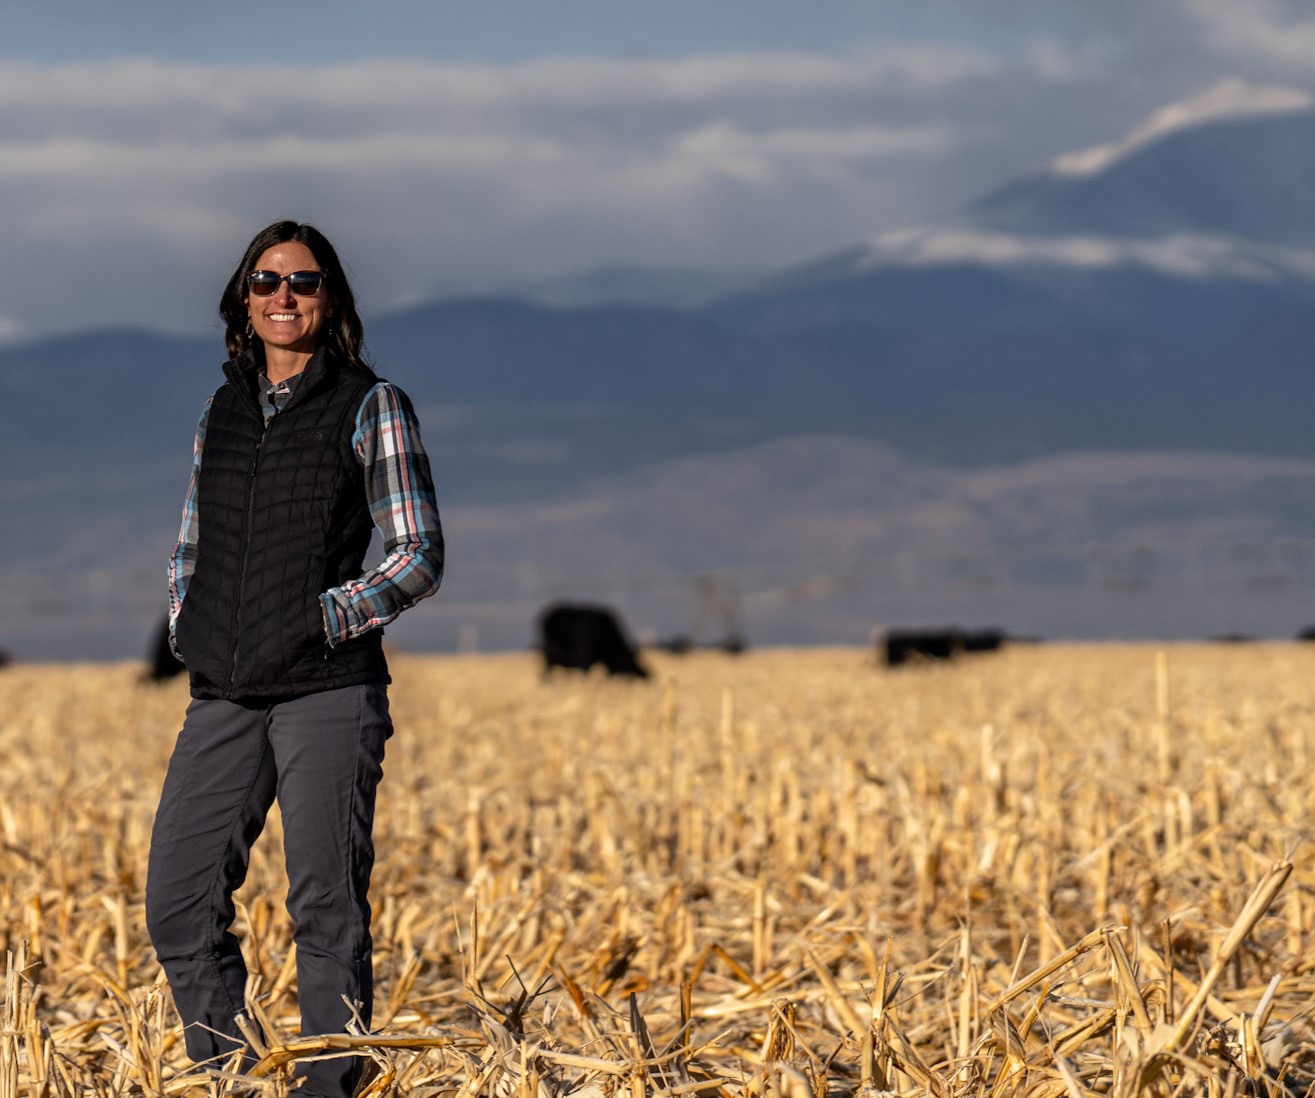 Vanessa is standing in a field with cows and mountains in the background